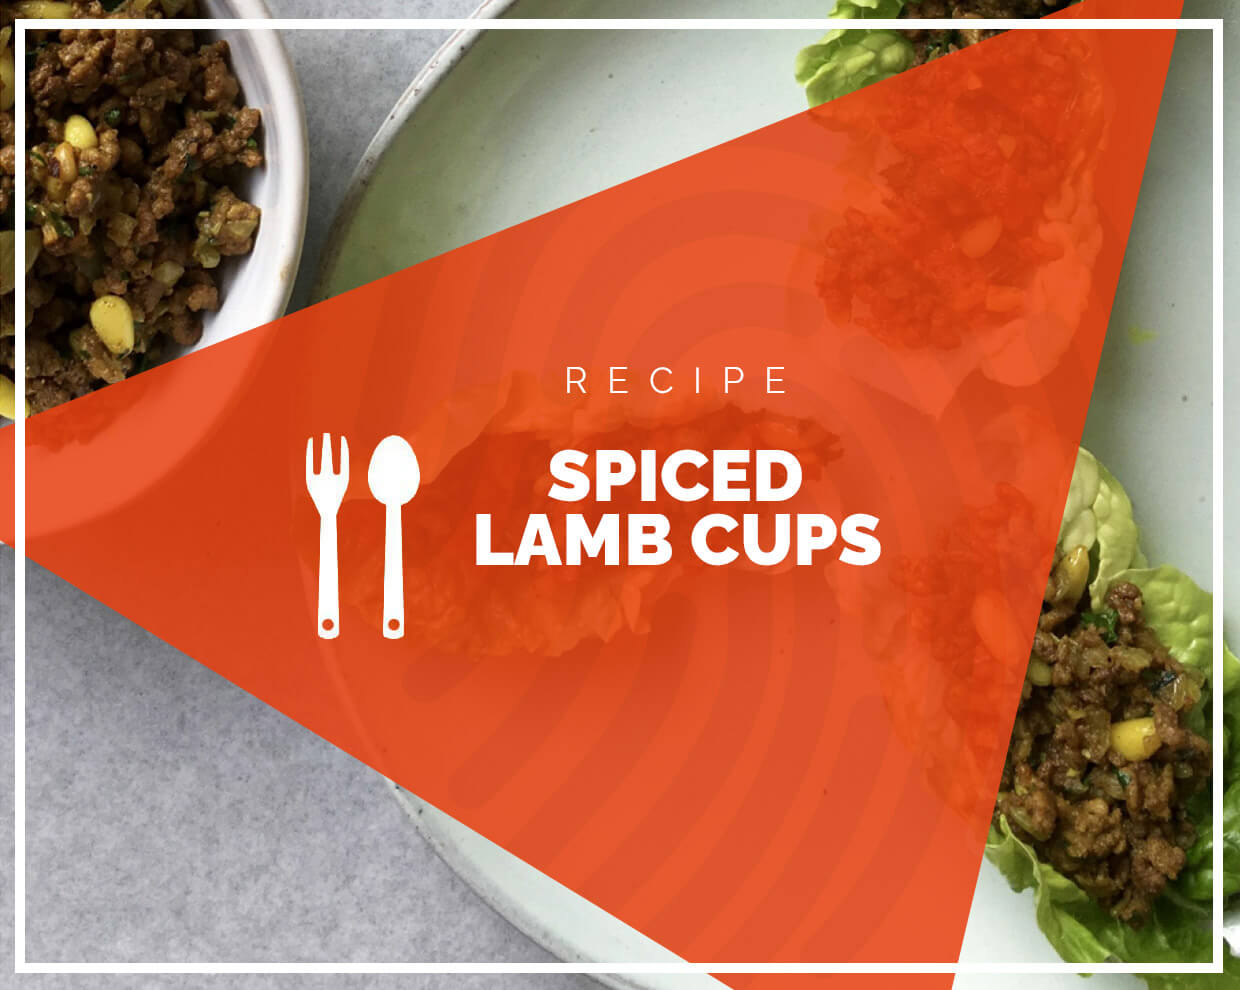 Spiced lamb cups 